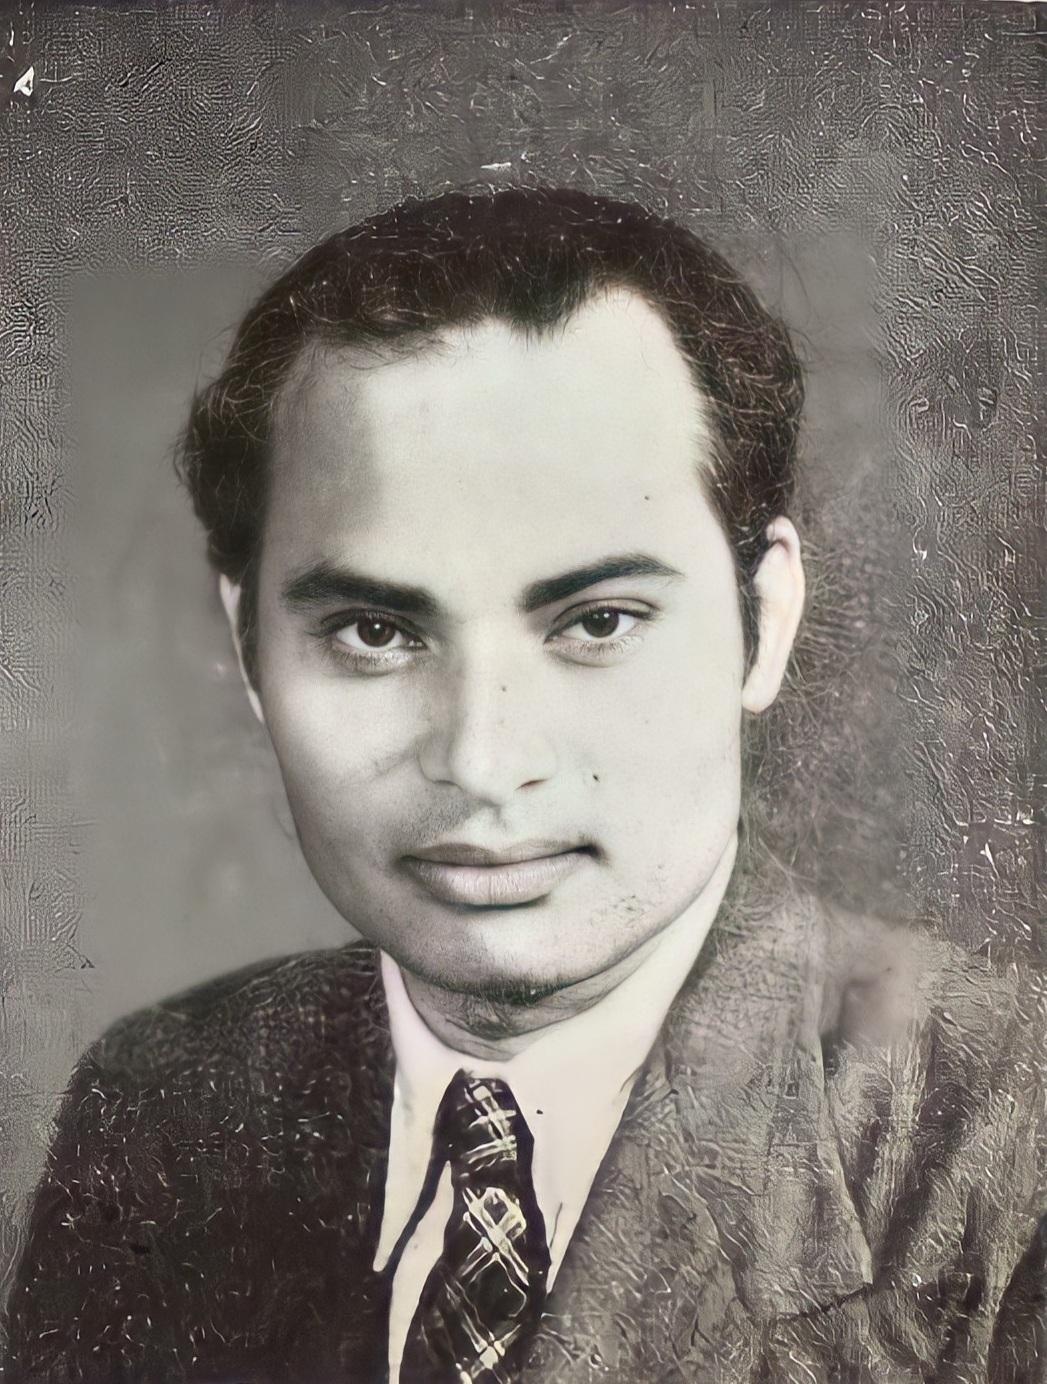 Sashadhar Mukherjee, a film producer who made his mark in the 1930s with Bombay Talkies, went on to create Filmistan Studio and his independent venture, Filmalaya. His notable works include movies like 